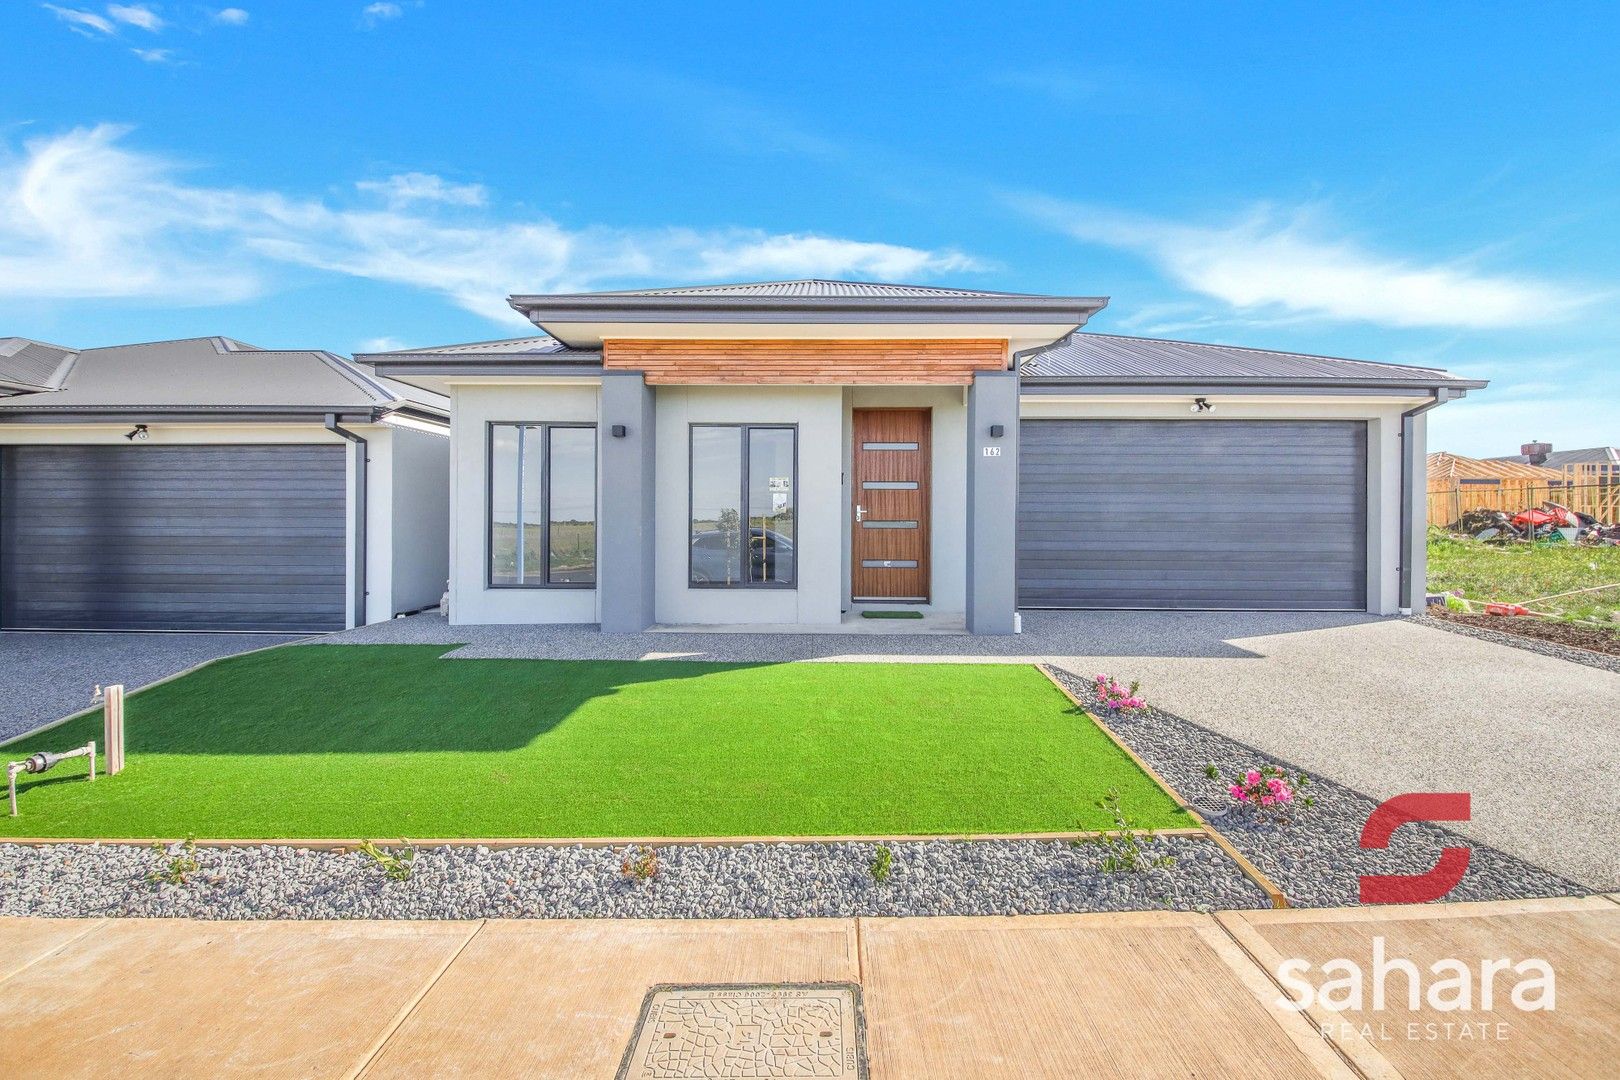 4 bedrooms House in 162 Sinclairs Road DEANSIDE VIC, 3336